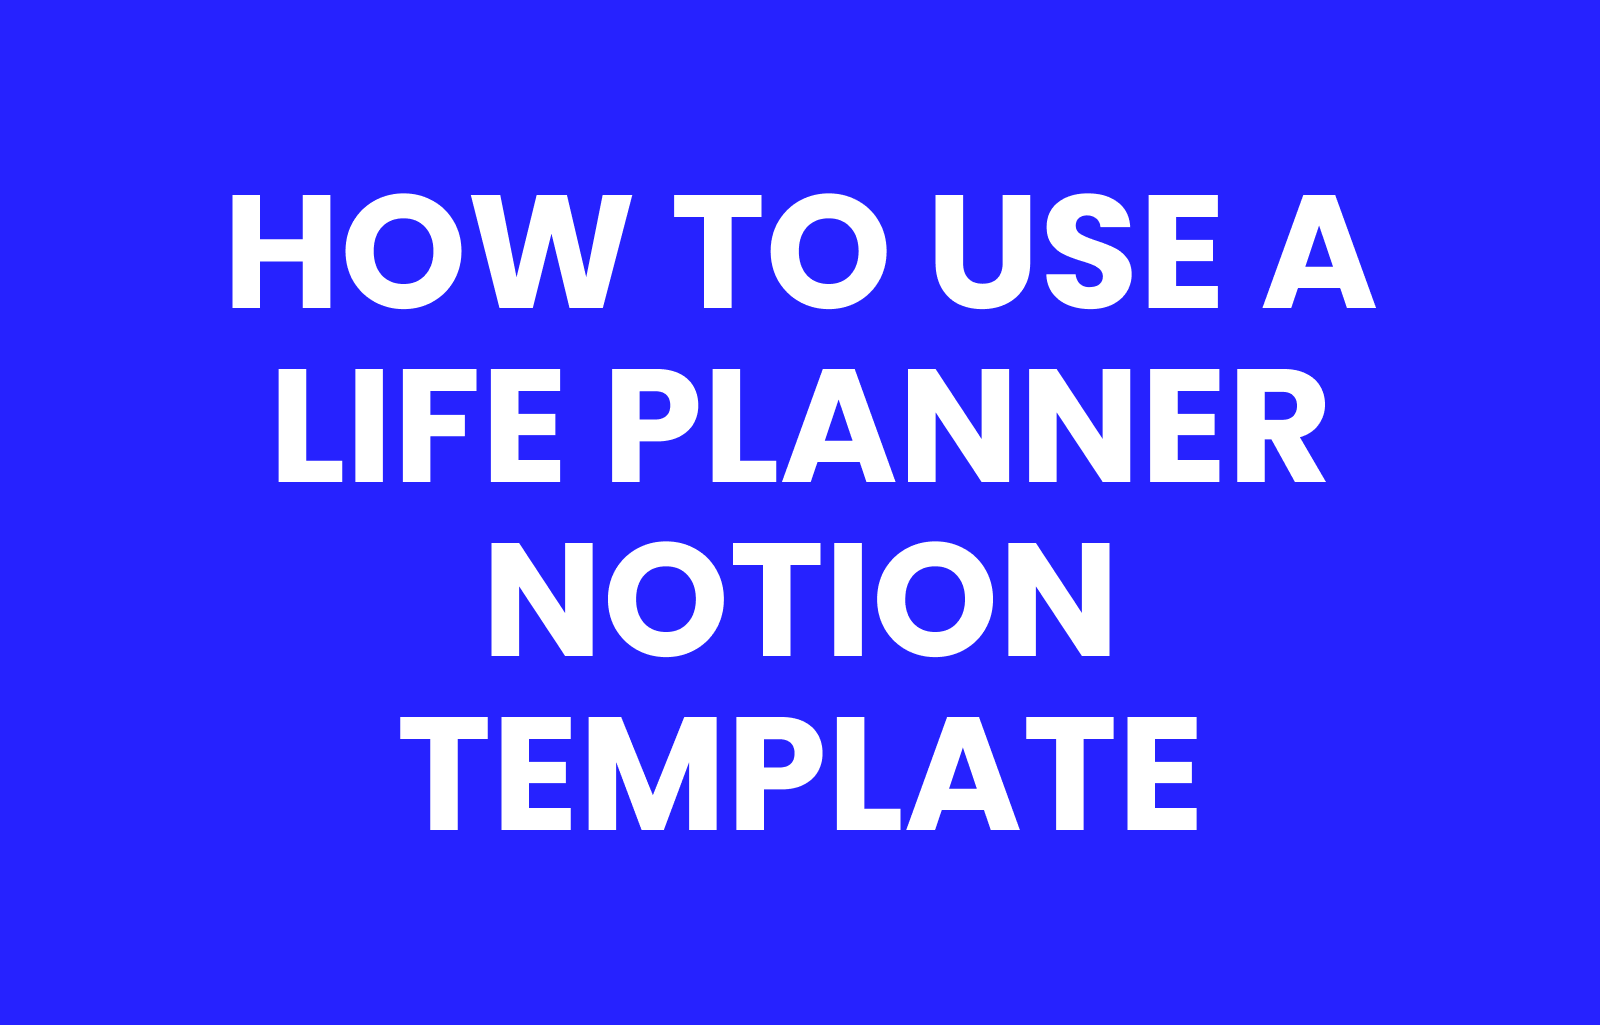 How to Use a Life Planner Notion Template